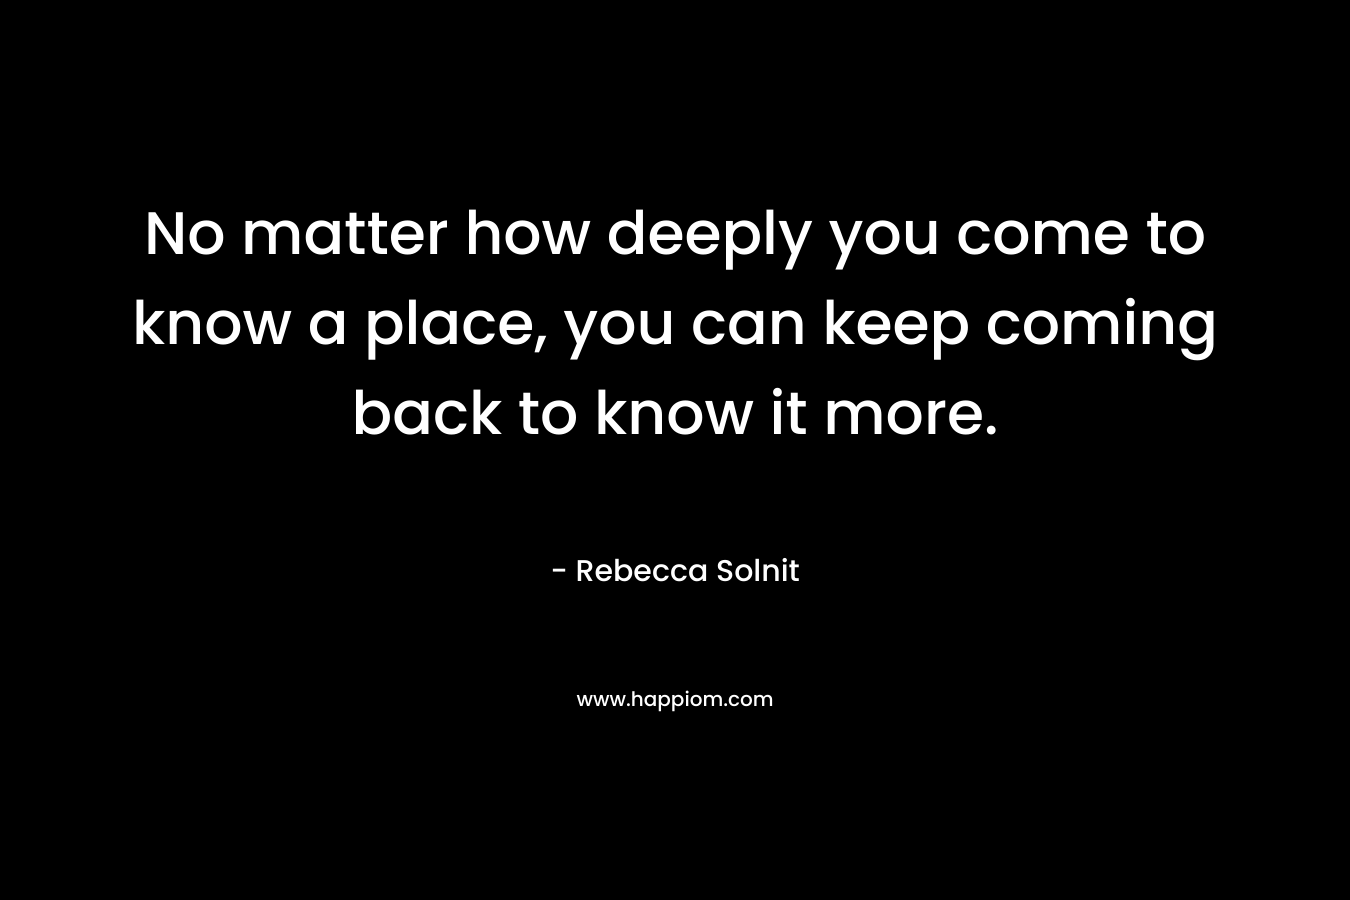 No matter how deeply you come to know a place, you can keep coming back to know it more.